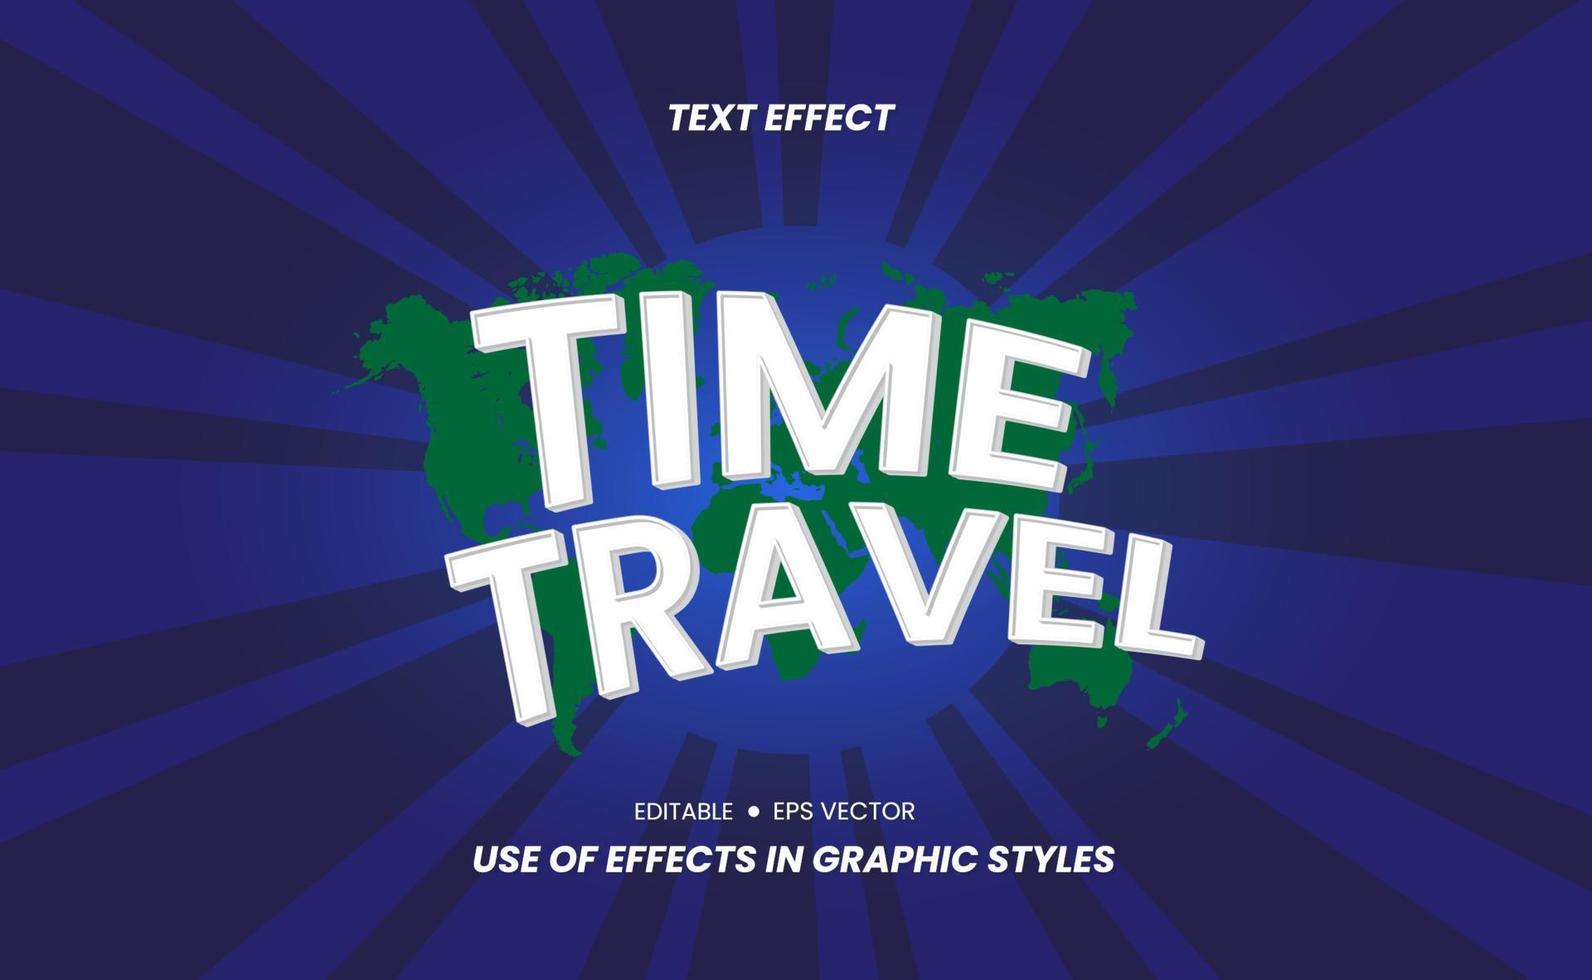 3D Text Effects with Time Travel Words and Easy to Edit vector